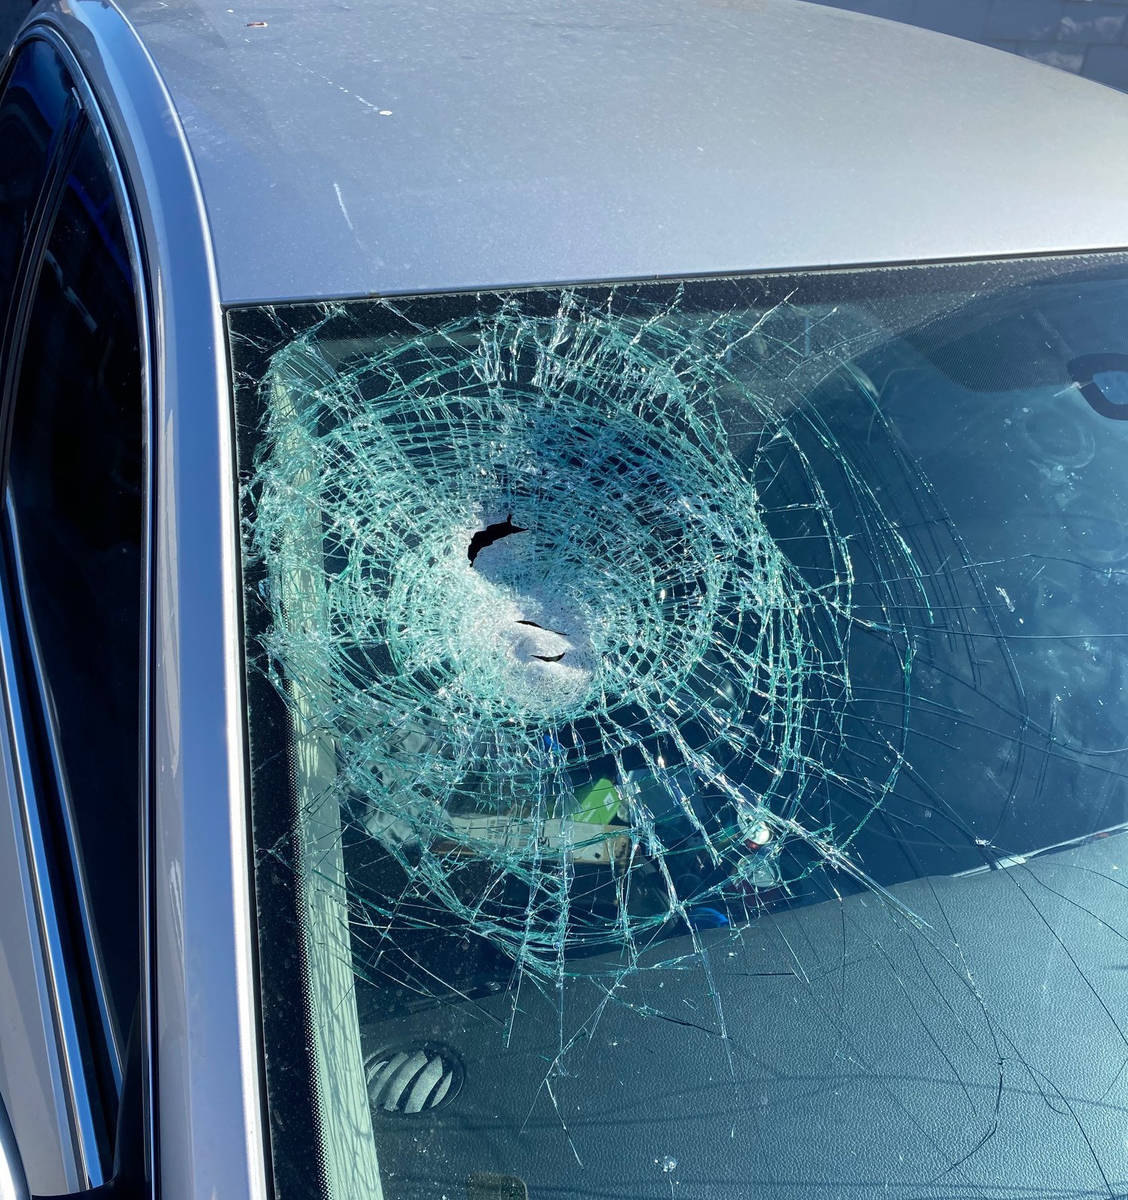 This is one of 25 vehicles damaged when rocks were thrown from an overpass on U.S. Highway 95 i ...